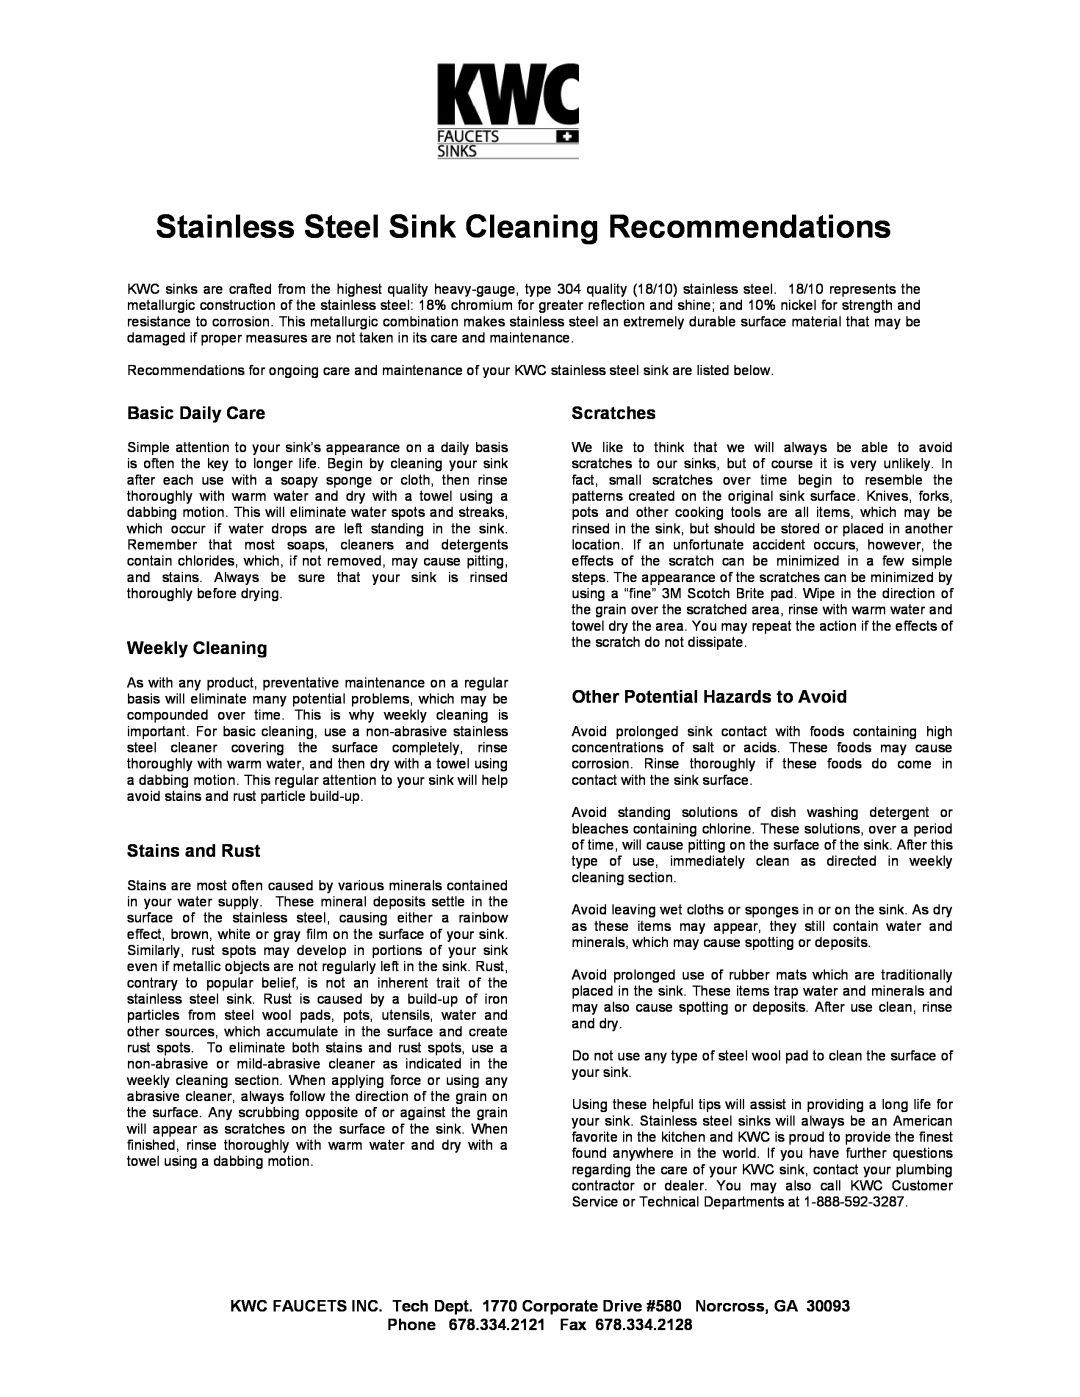 KWC Plumbing Product manual Stainless Steel Sink Cleaning Recommendations, Basic Daily Care, Weekly Cleaning, Scratches 